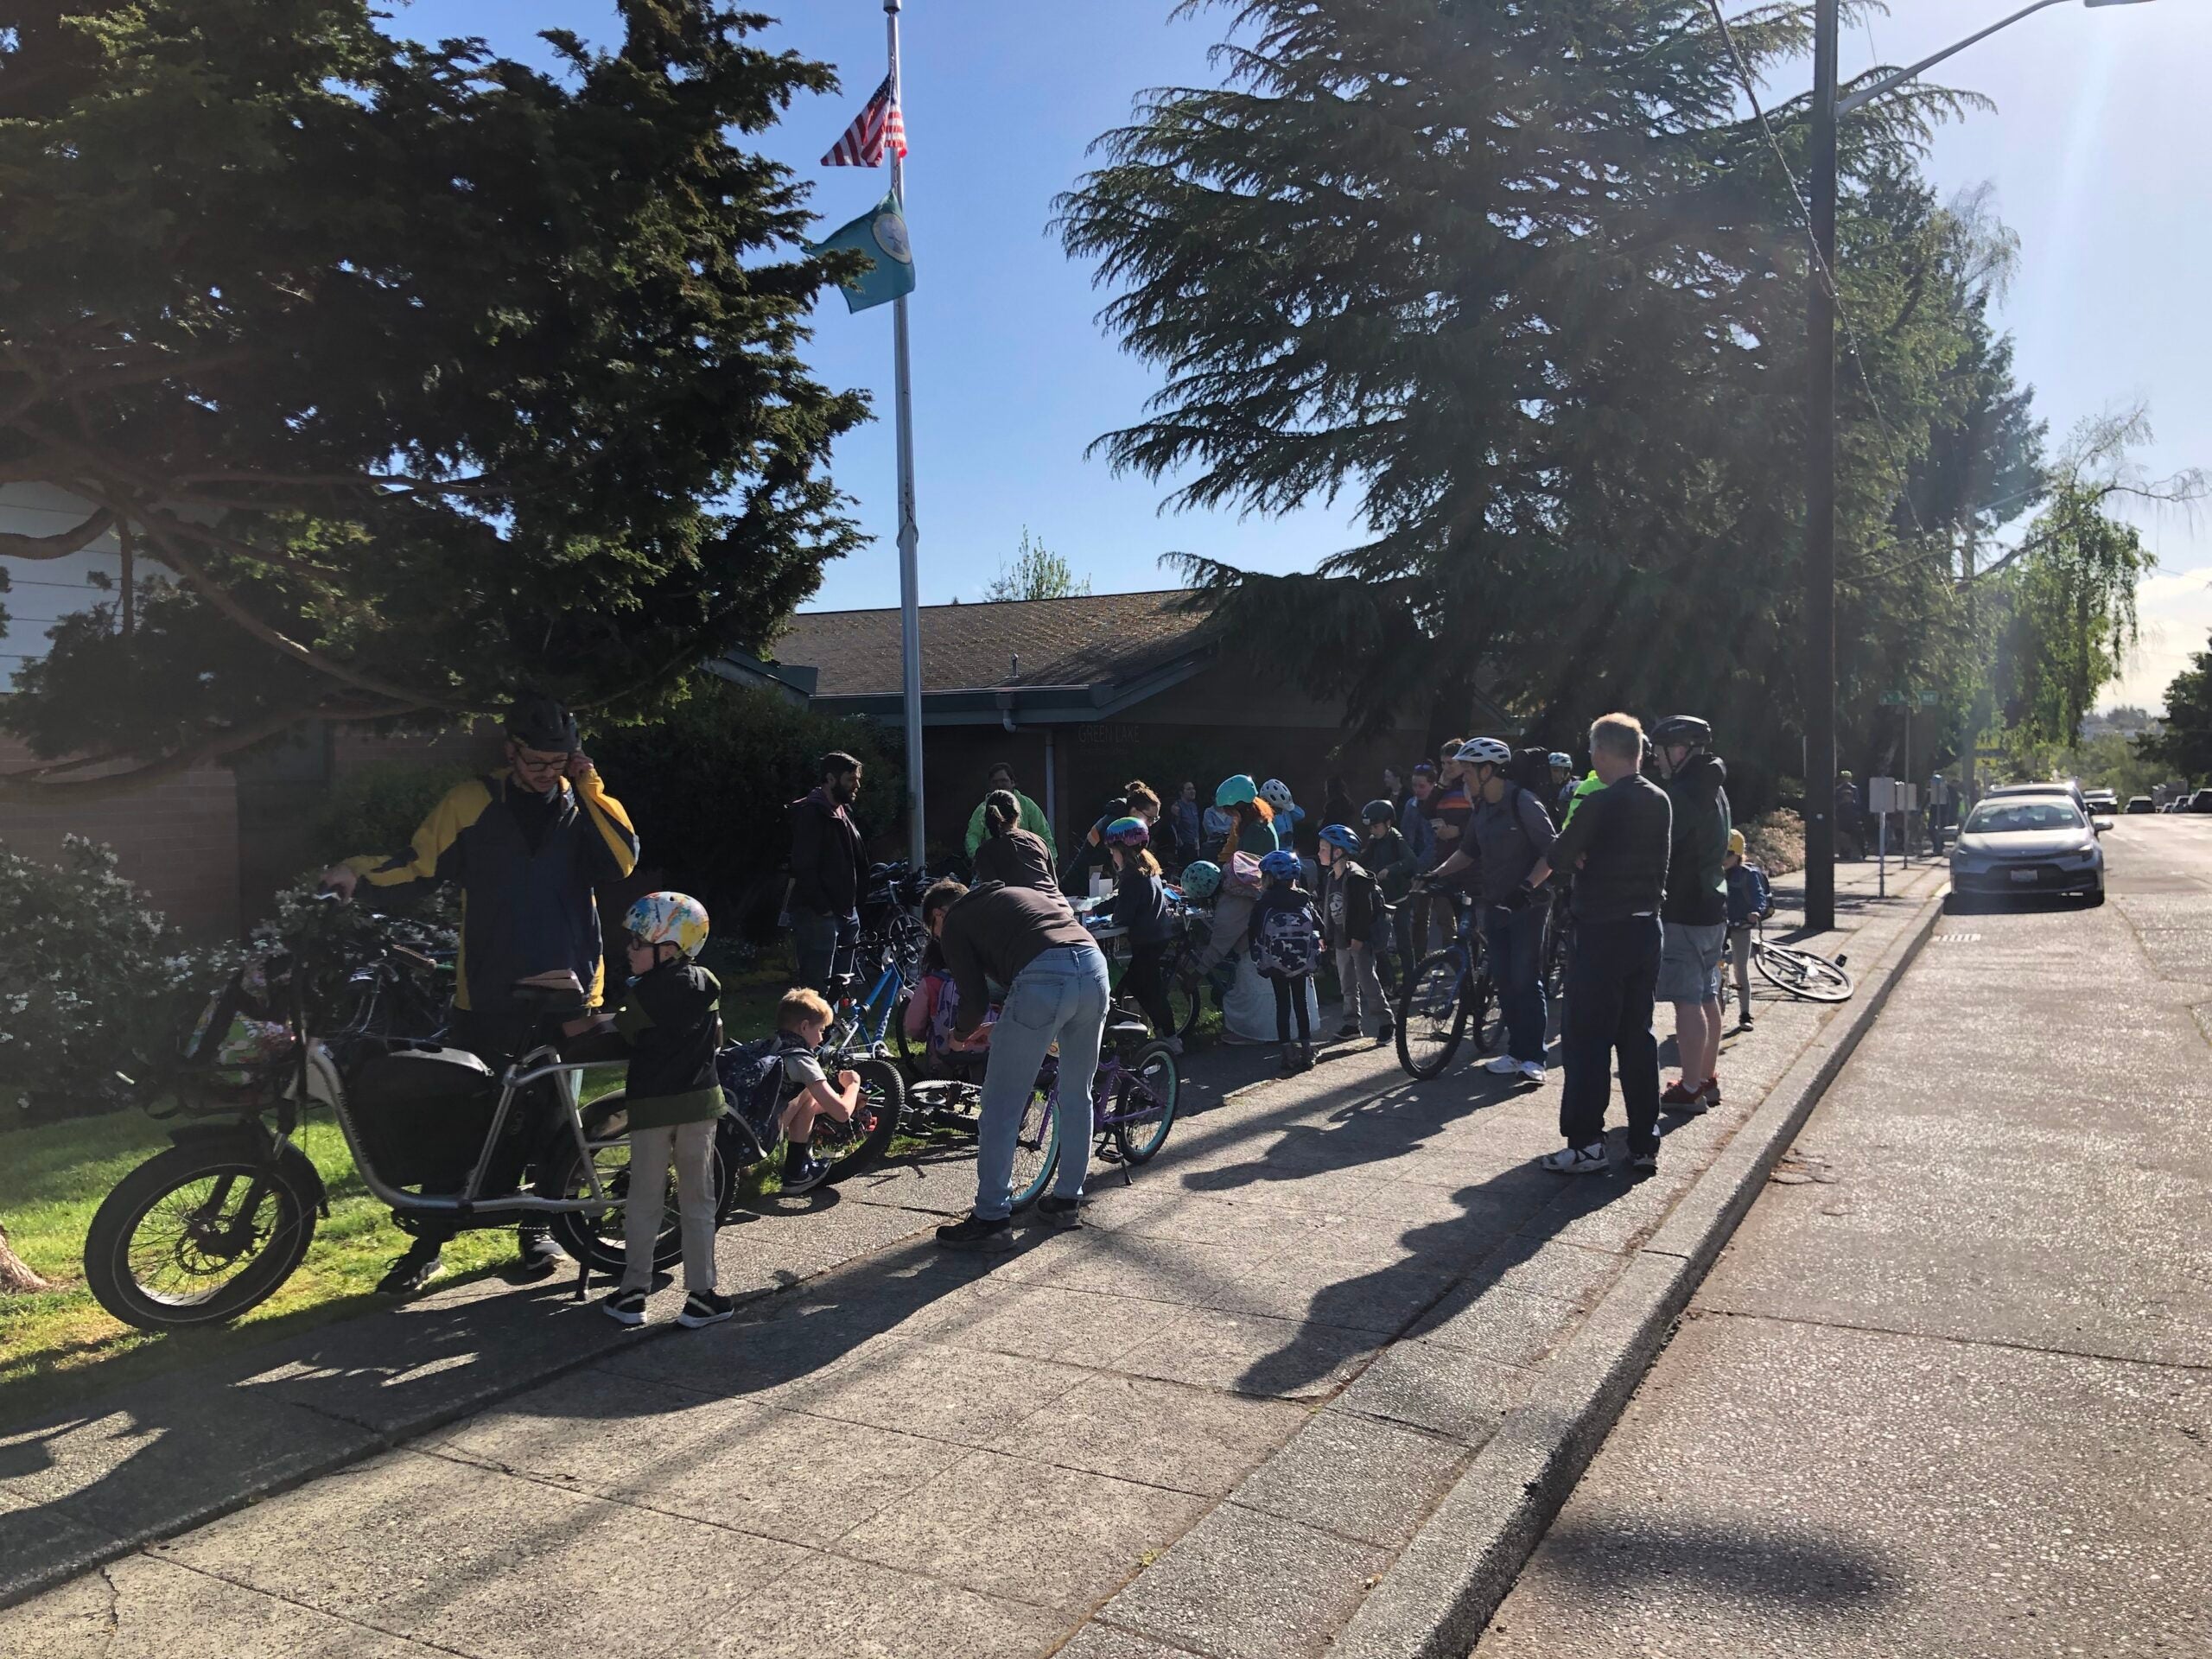 Group of students and caregivers on bikes outside of Green Lake Elementary